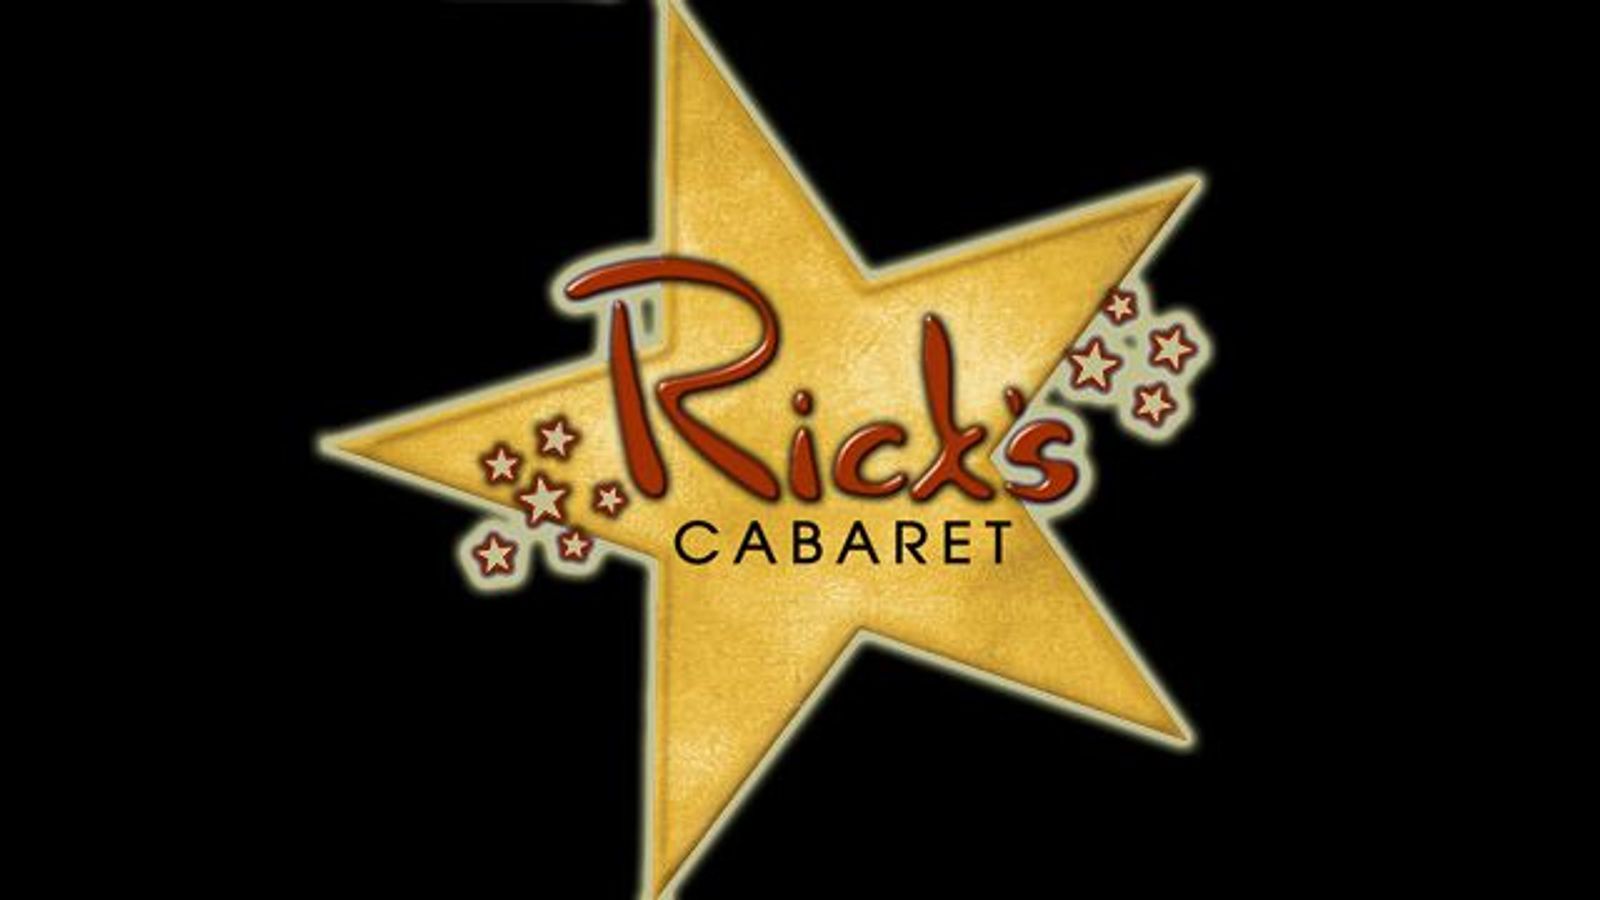 Rick's Cabaret Earns Upgrade to 'Neutral' Rating